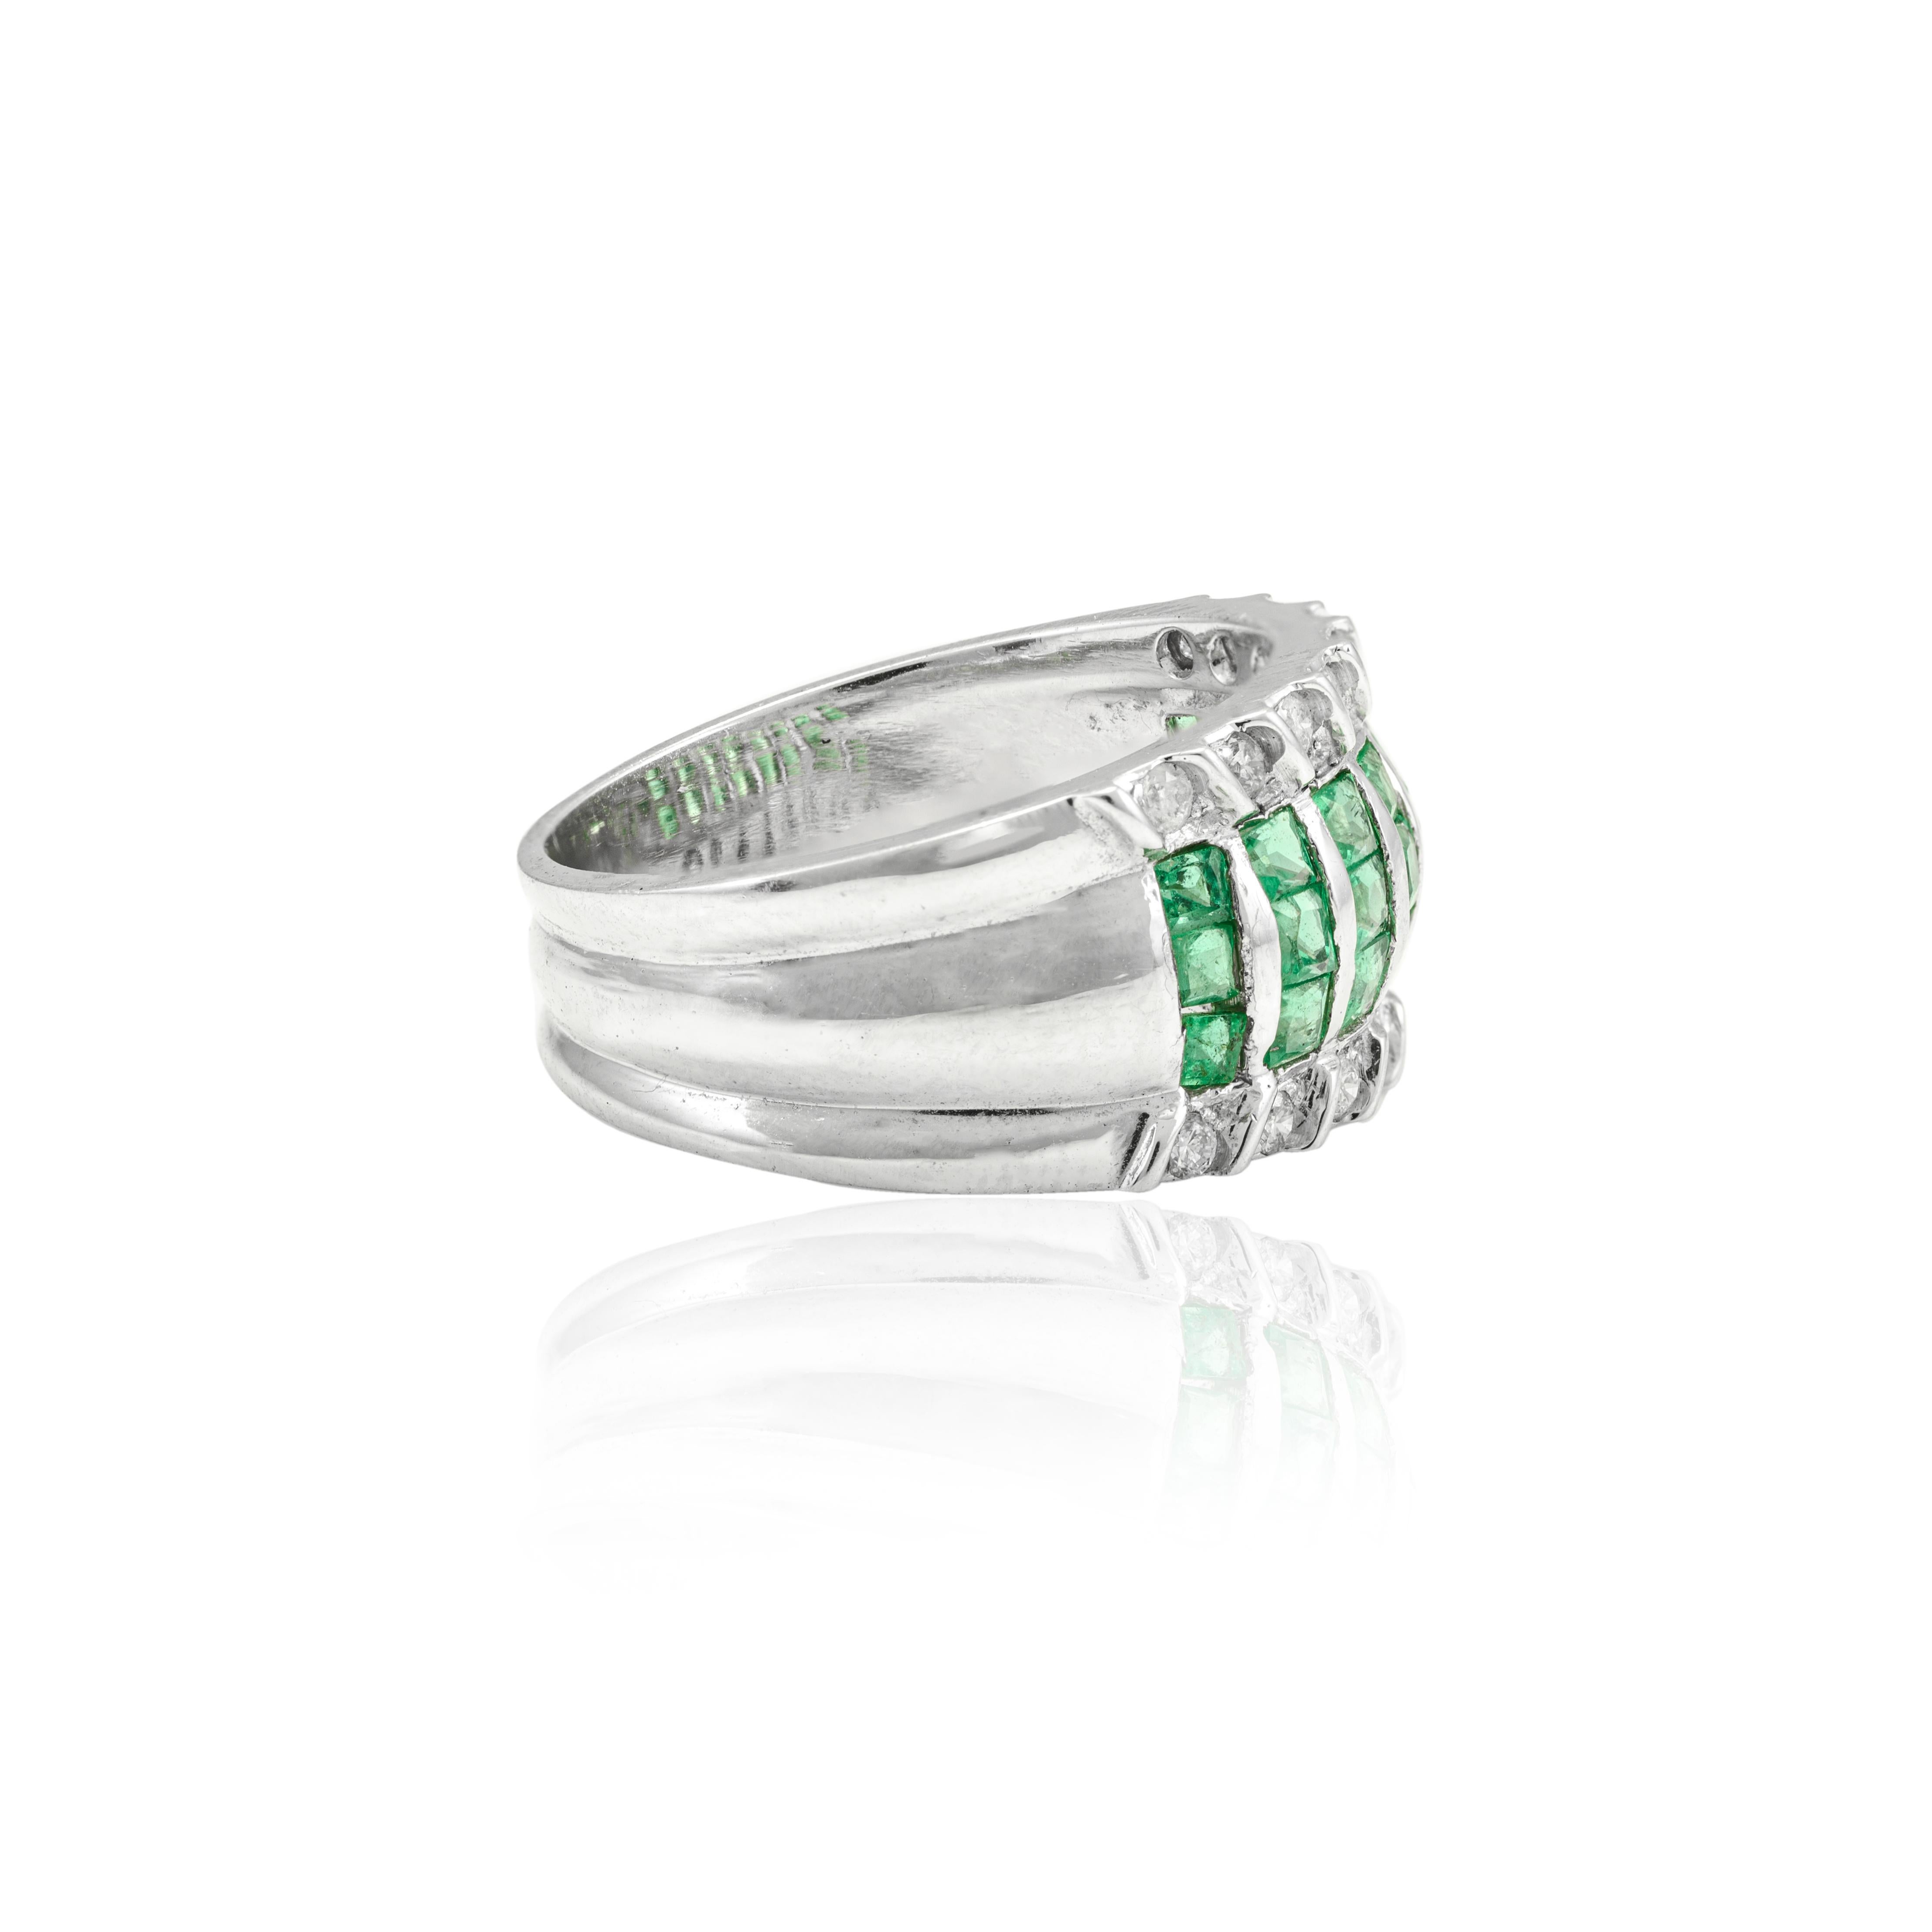 For Sale:  18k Solid White Gold 1 Carat Emerald and Diamond Wide Band Ring, Mens Jewelry 7